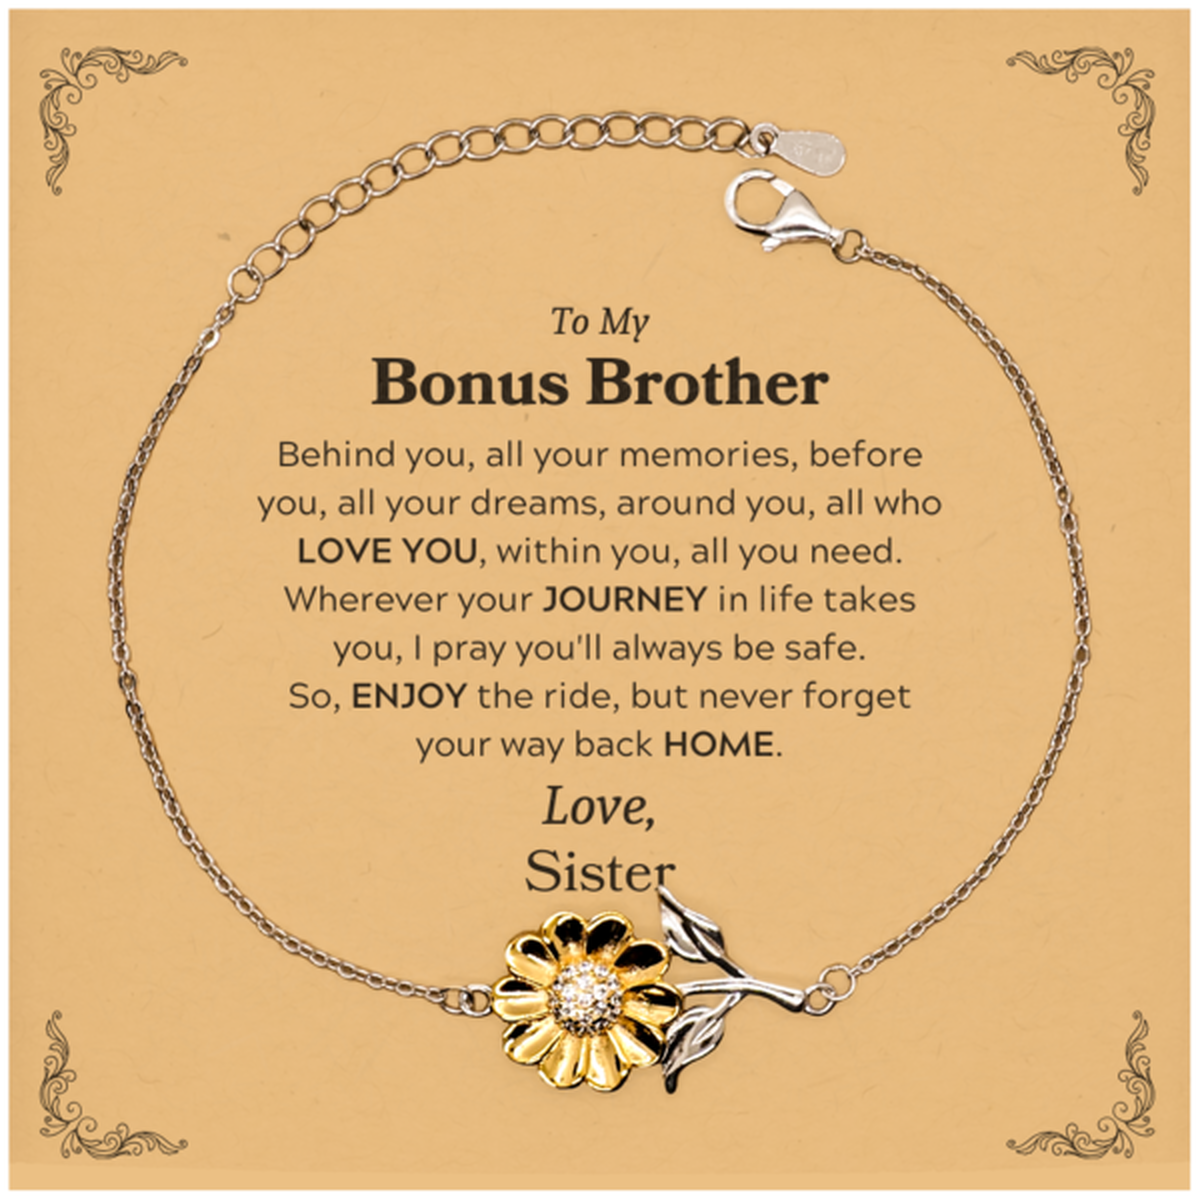 To My Bonus Brother Graduation Gifts from Sister, Bonus Brother Sunflower Bracelet Christmas Birthday Gifts for Bonus Brother Behind you, all your memories, before you, all your dreams. Love, Sister